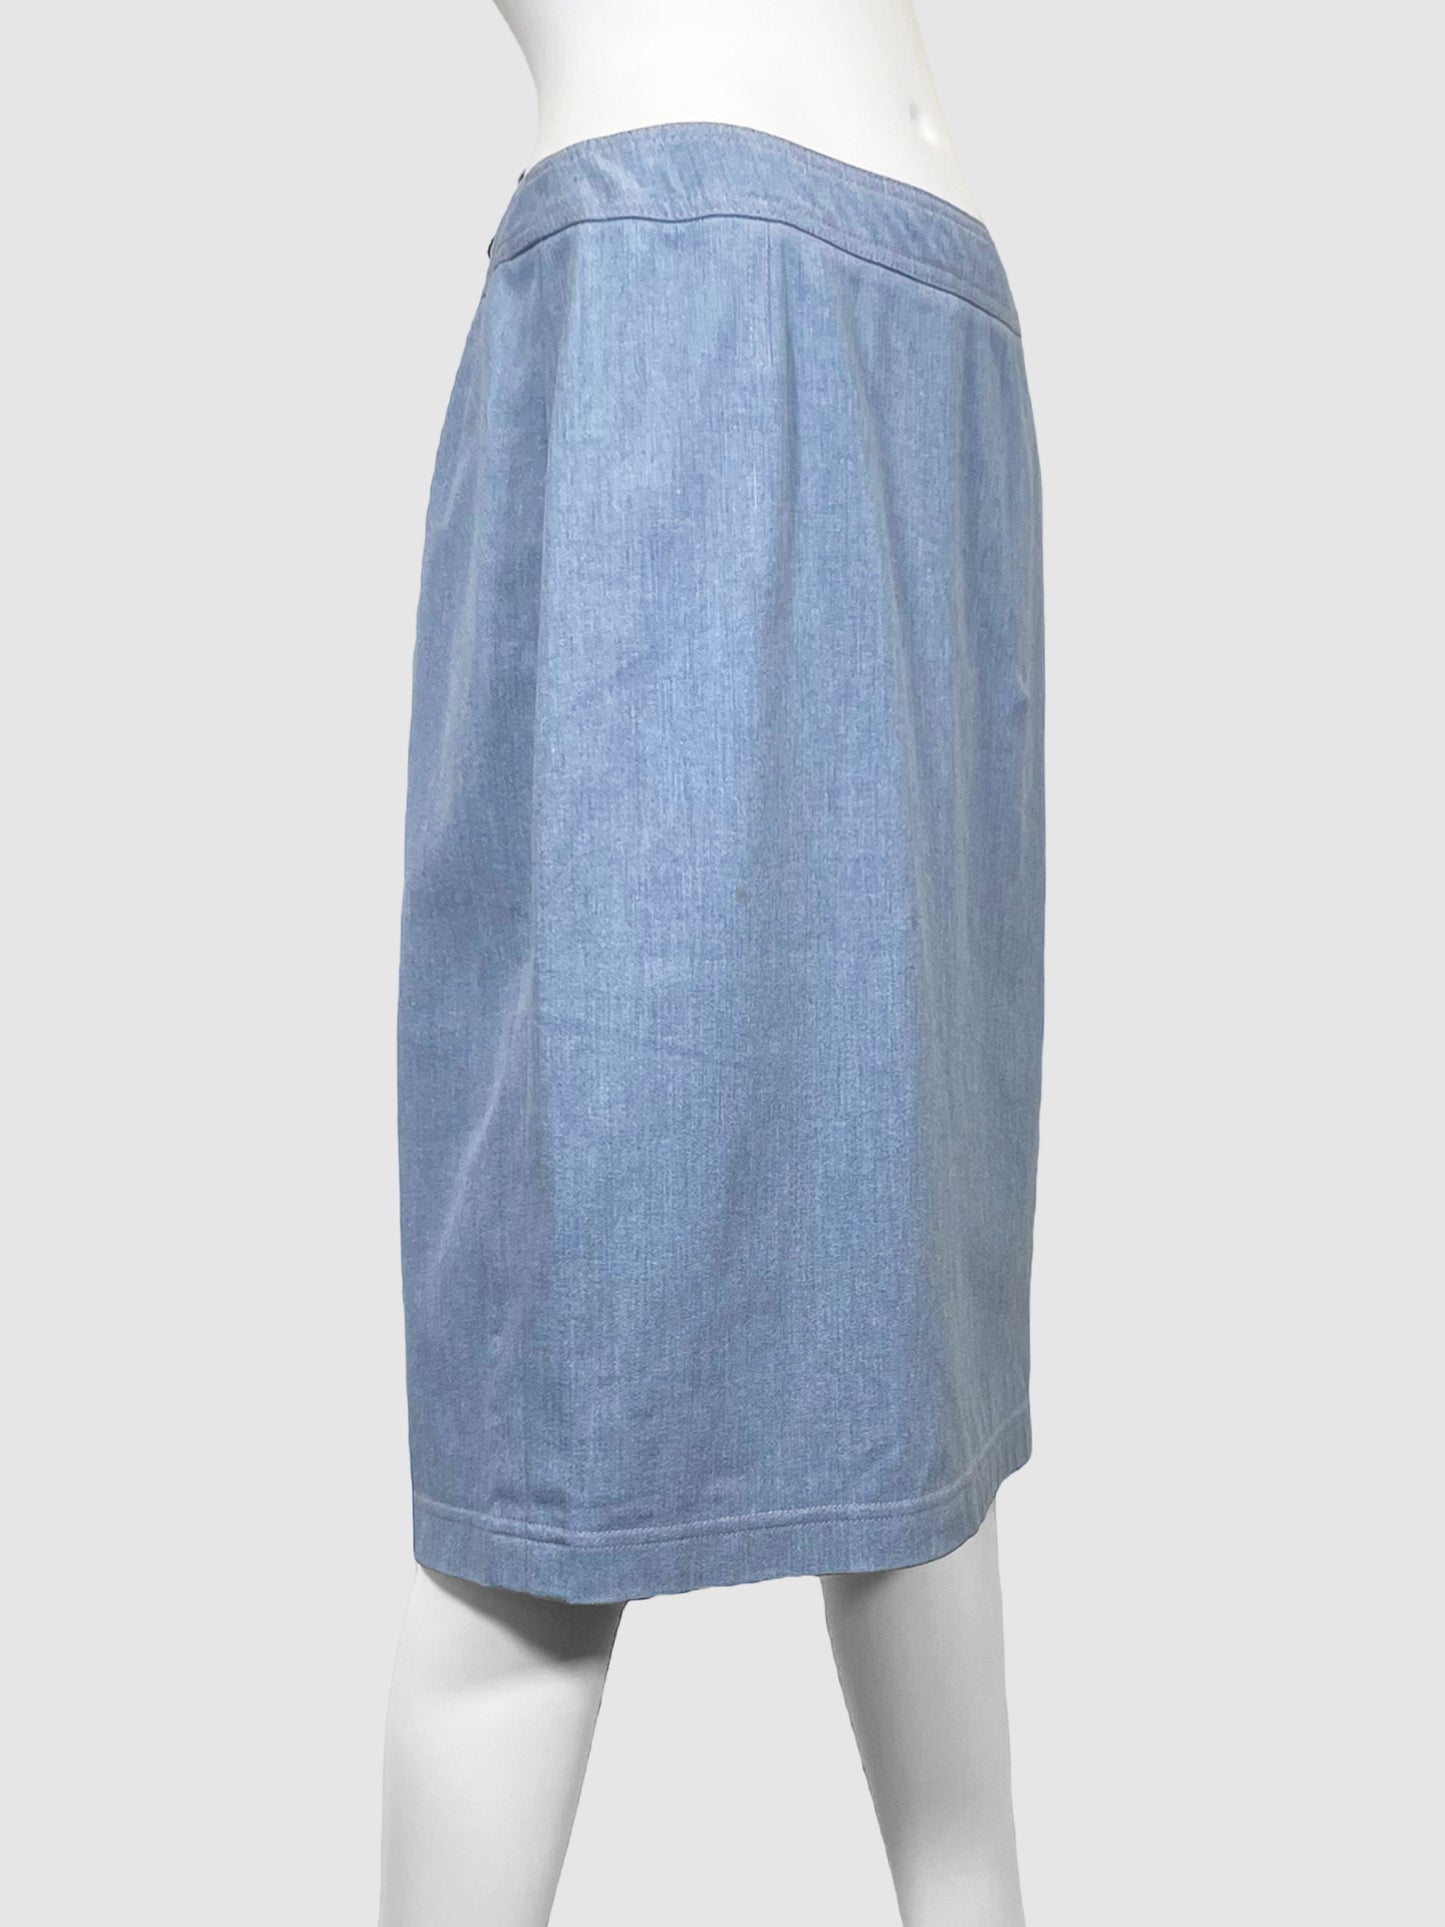 Denim Skirt with Contrast Stitching - Size 42